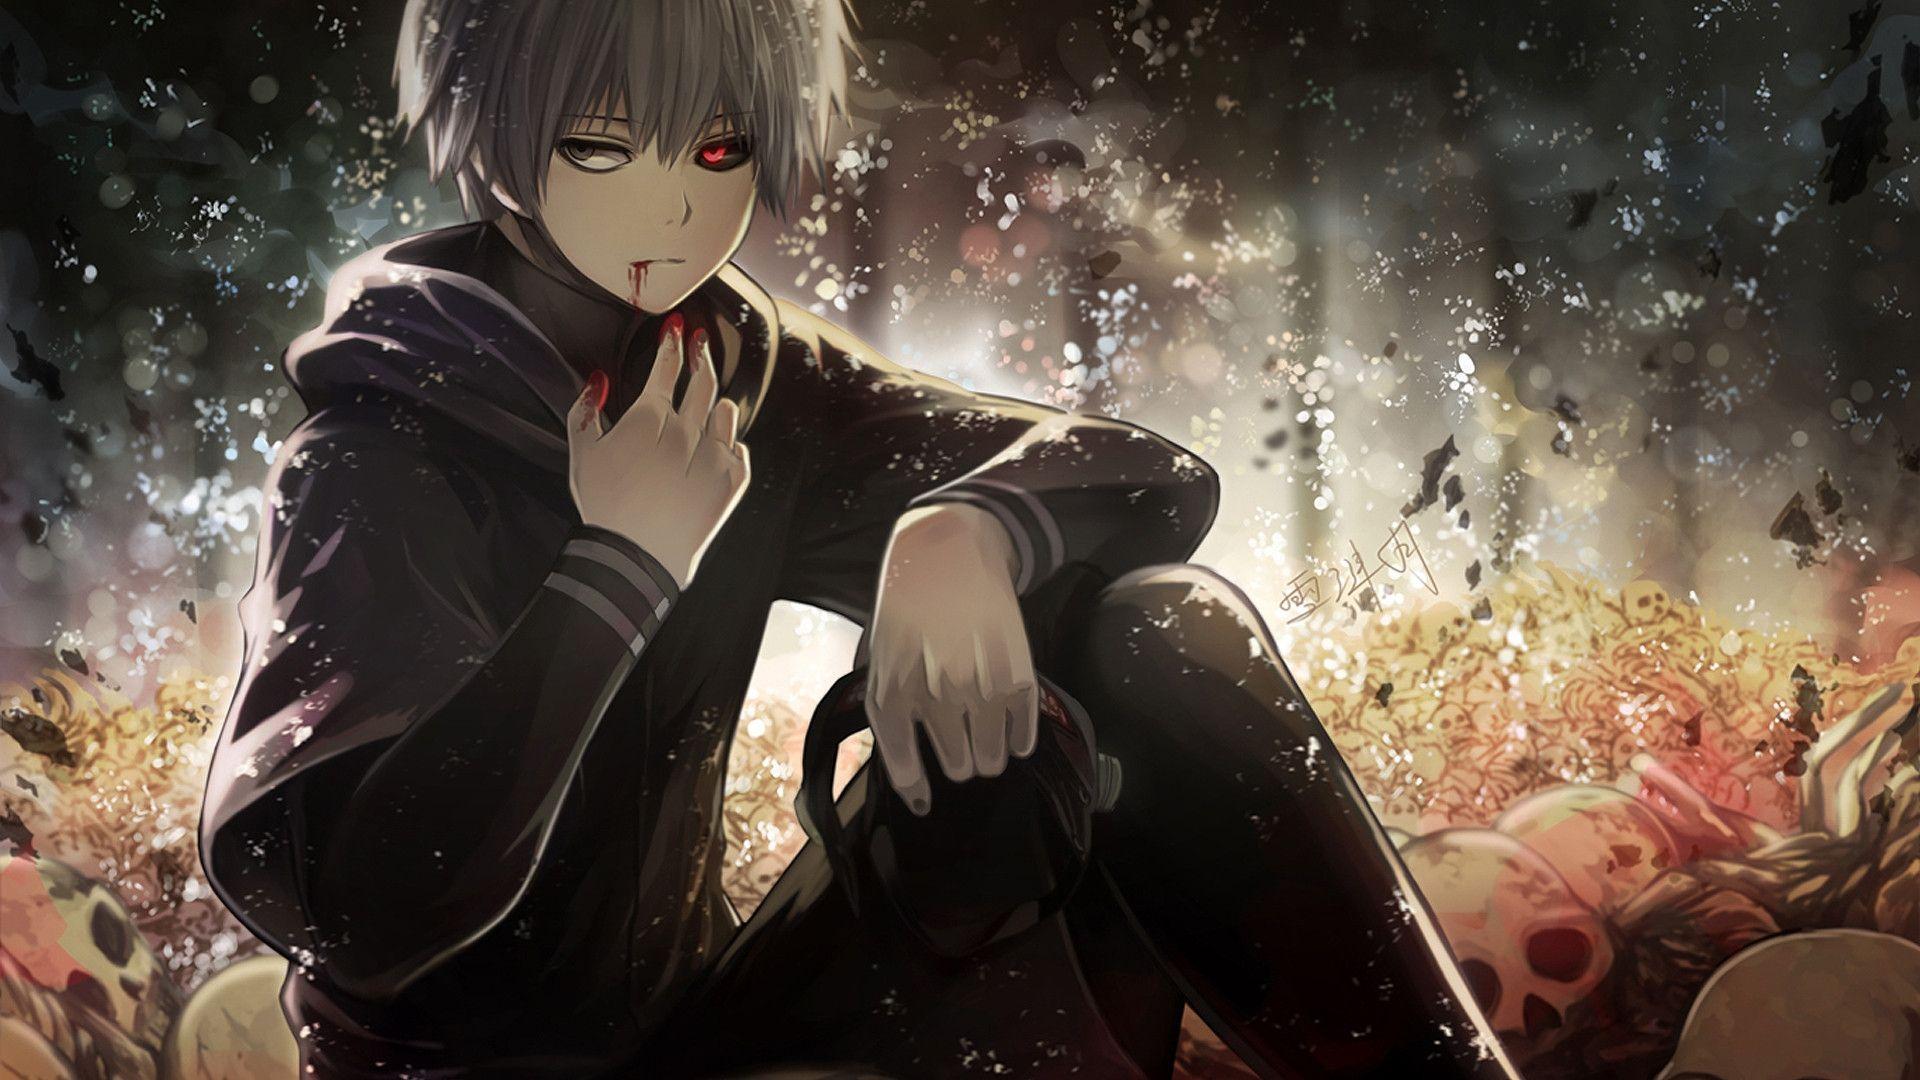 27 Anime Wallpaper 1920x1080 Tokyo Ghoul Anime Top Wallpaper Images, Photos, Reviews